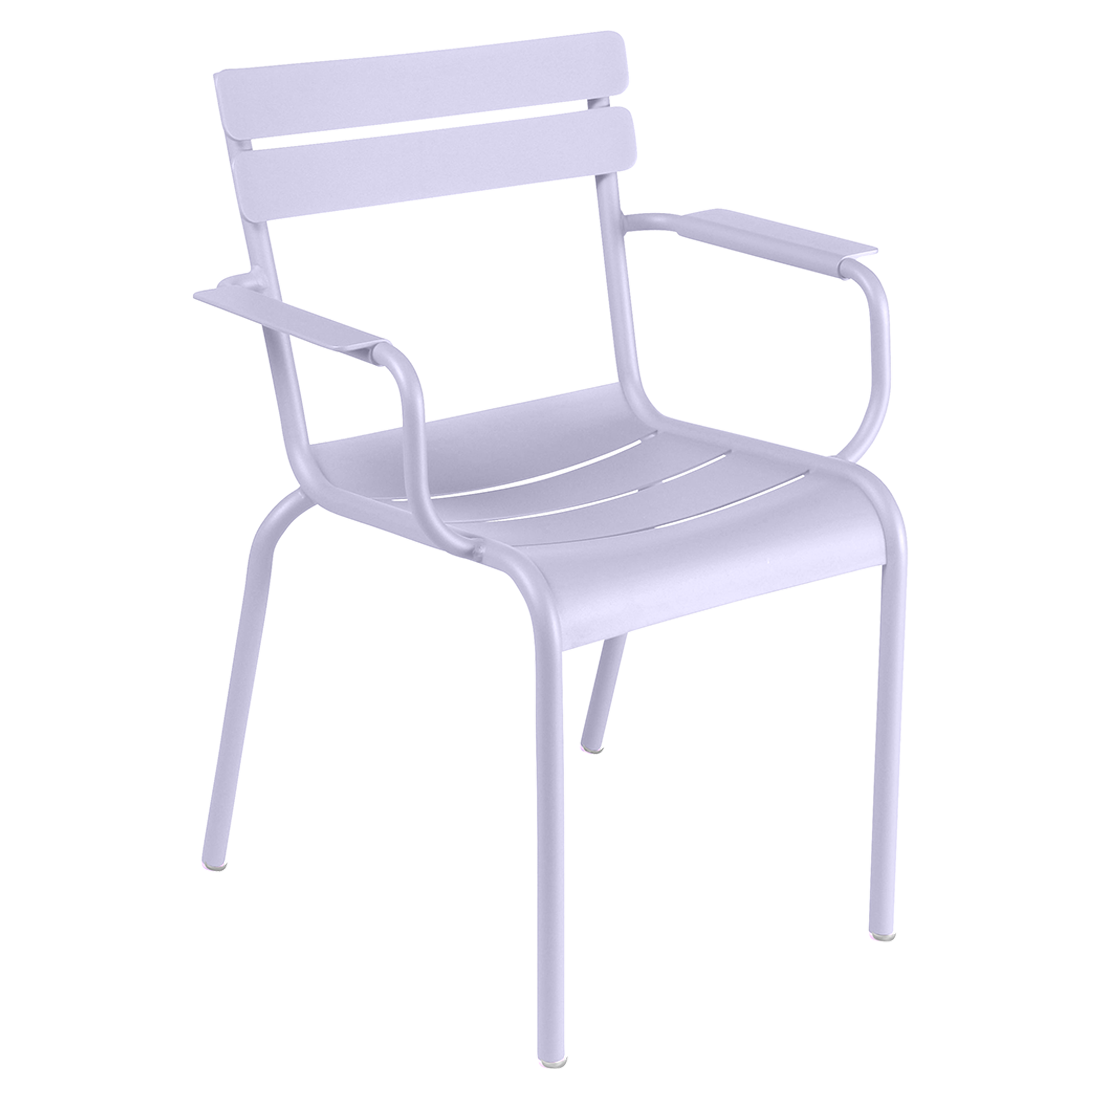 LUXEMBOURG STEEL ARMCHAIR (Exc. Cont.)